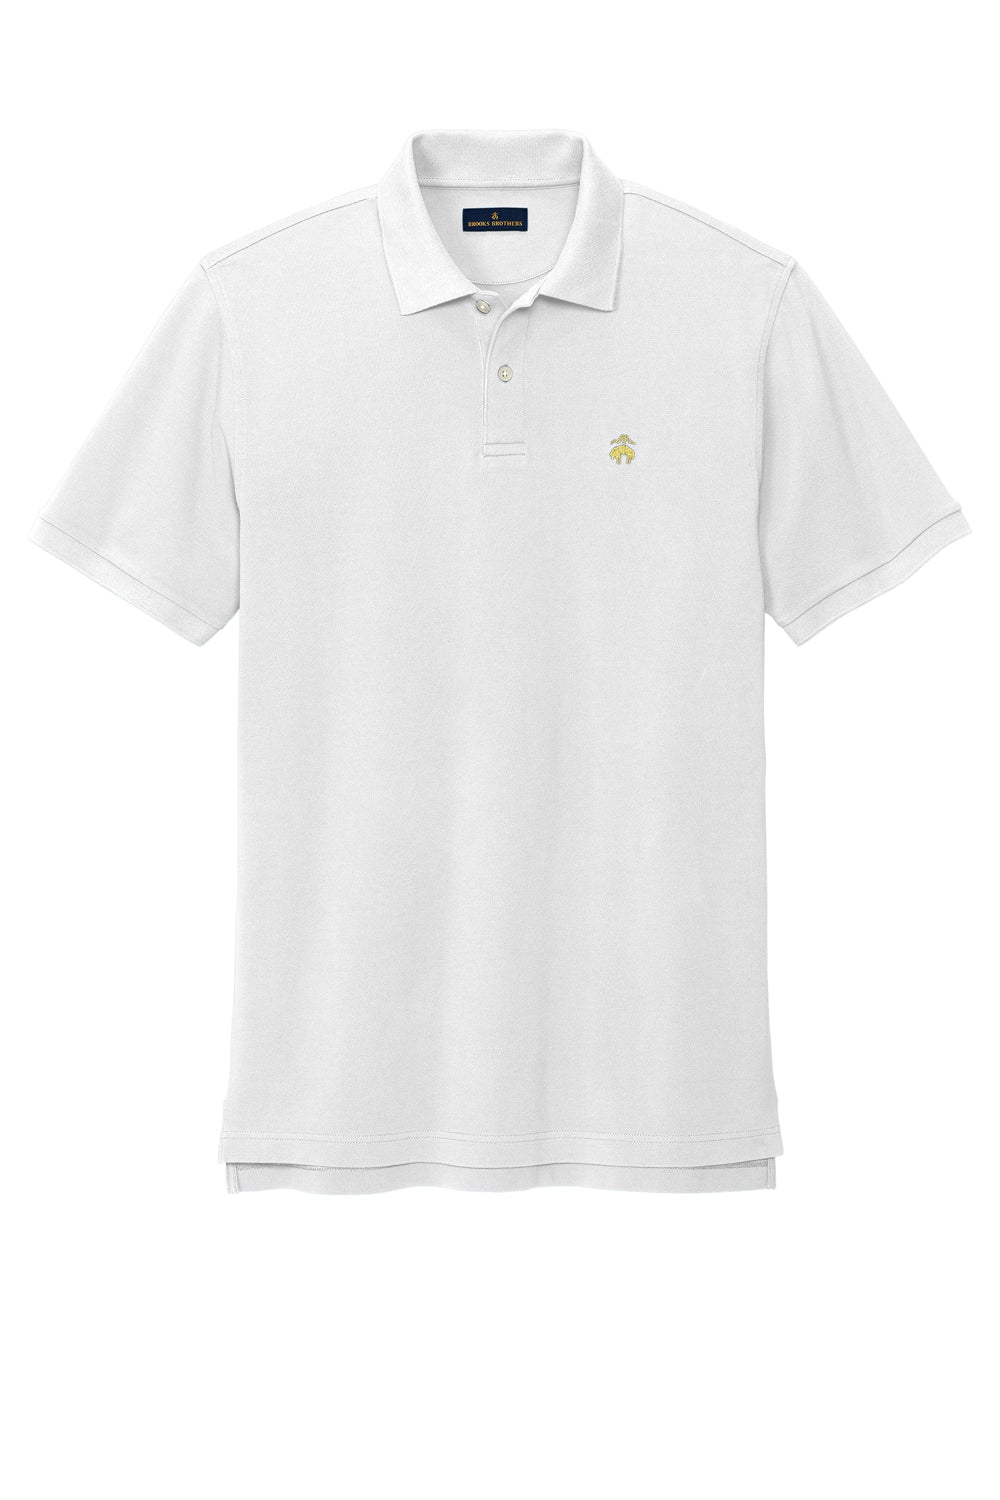 Brooks Brothers Mens Pique Short Sleeve Polo Shirt White Flat Front